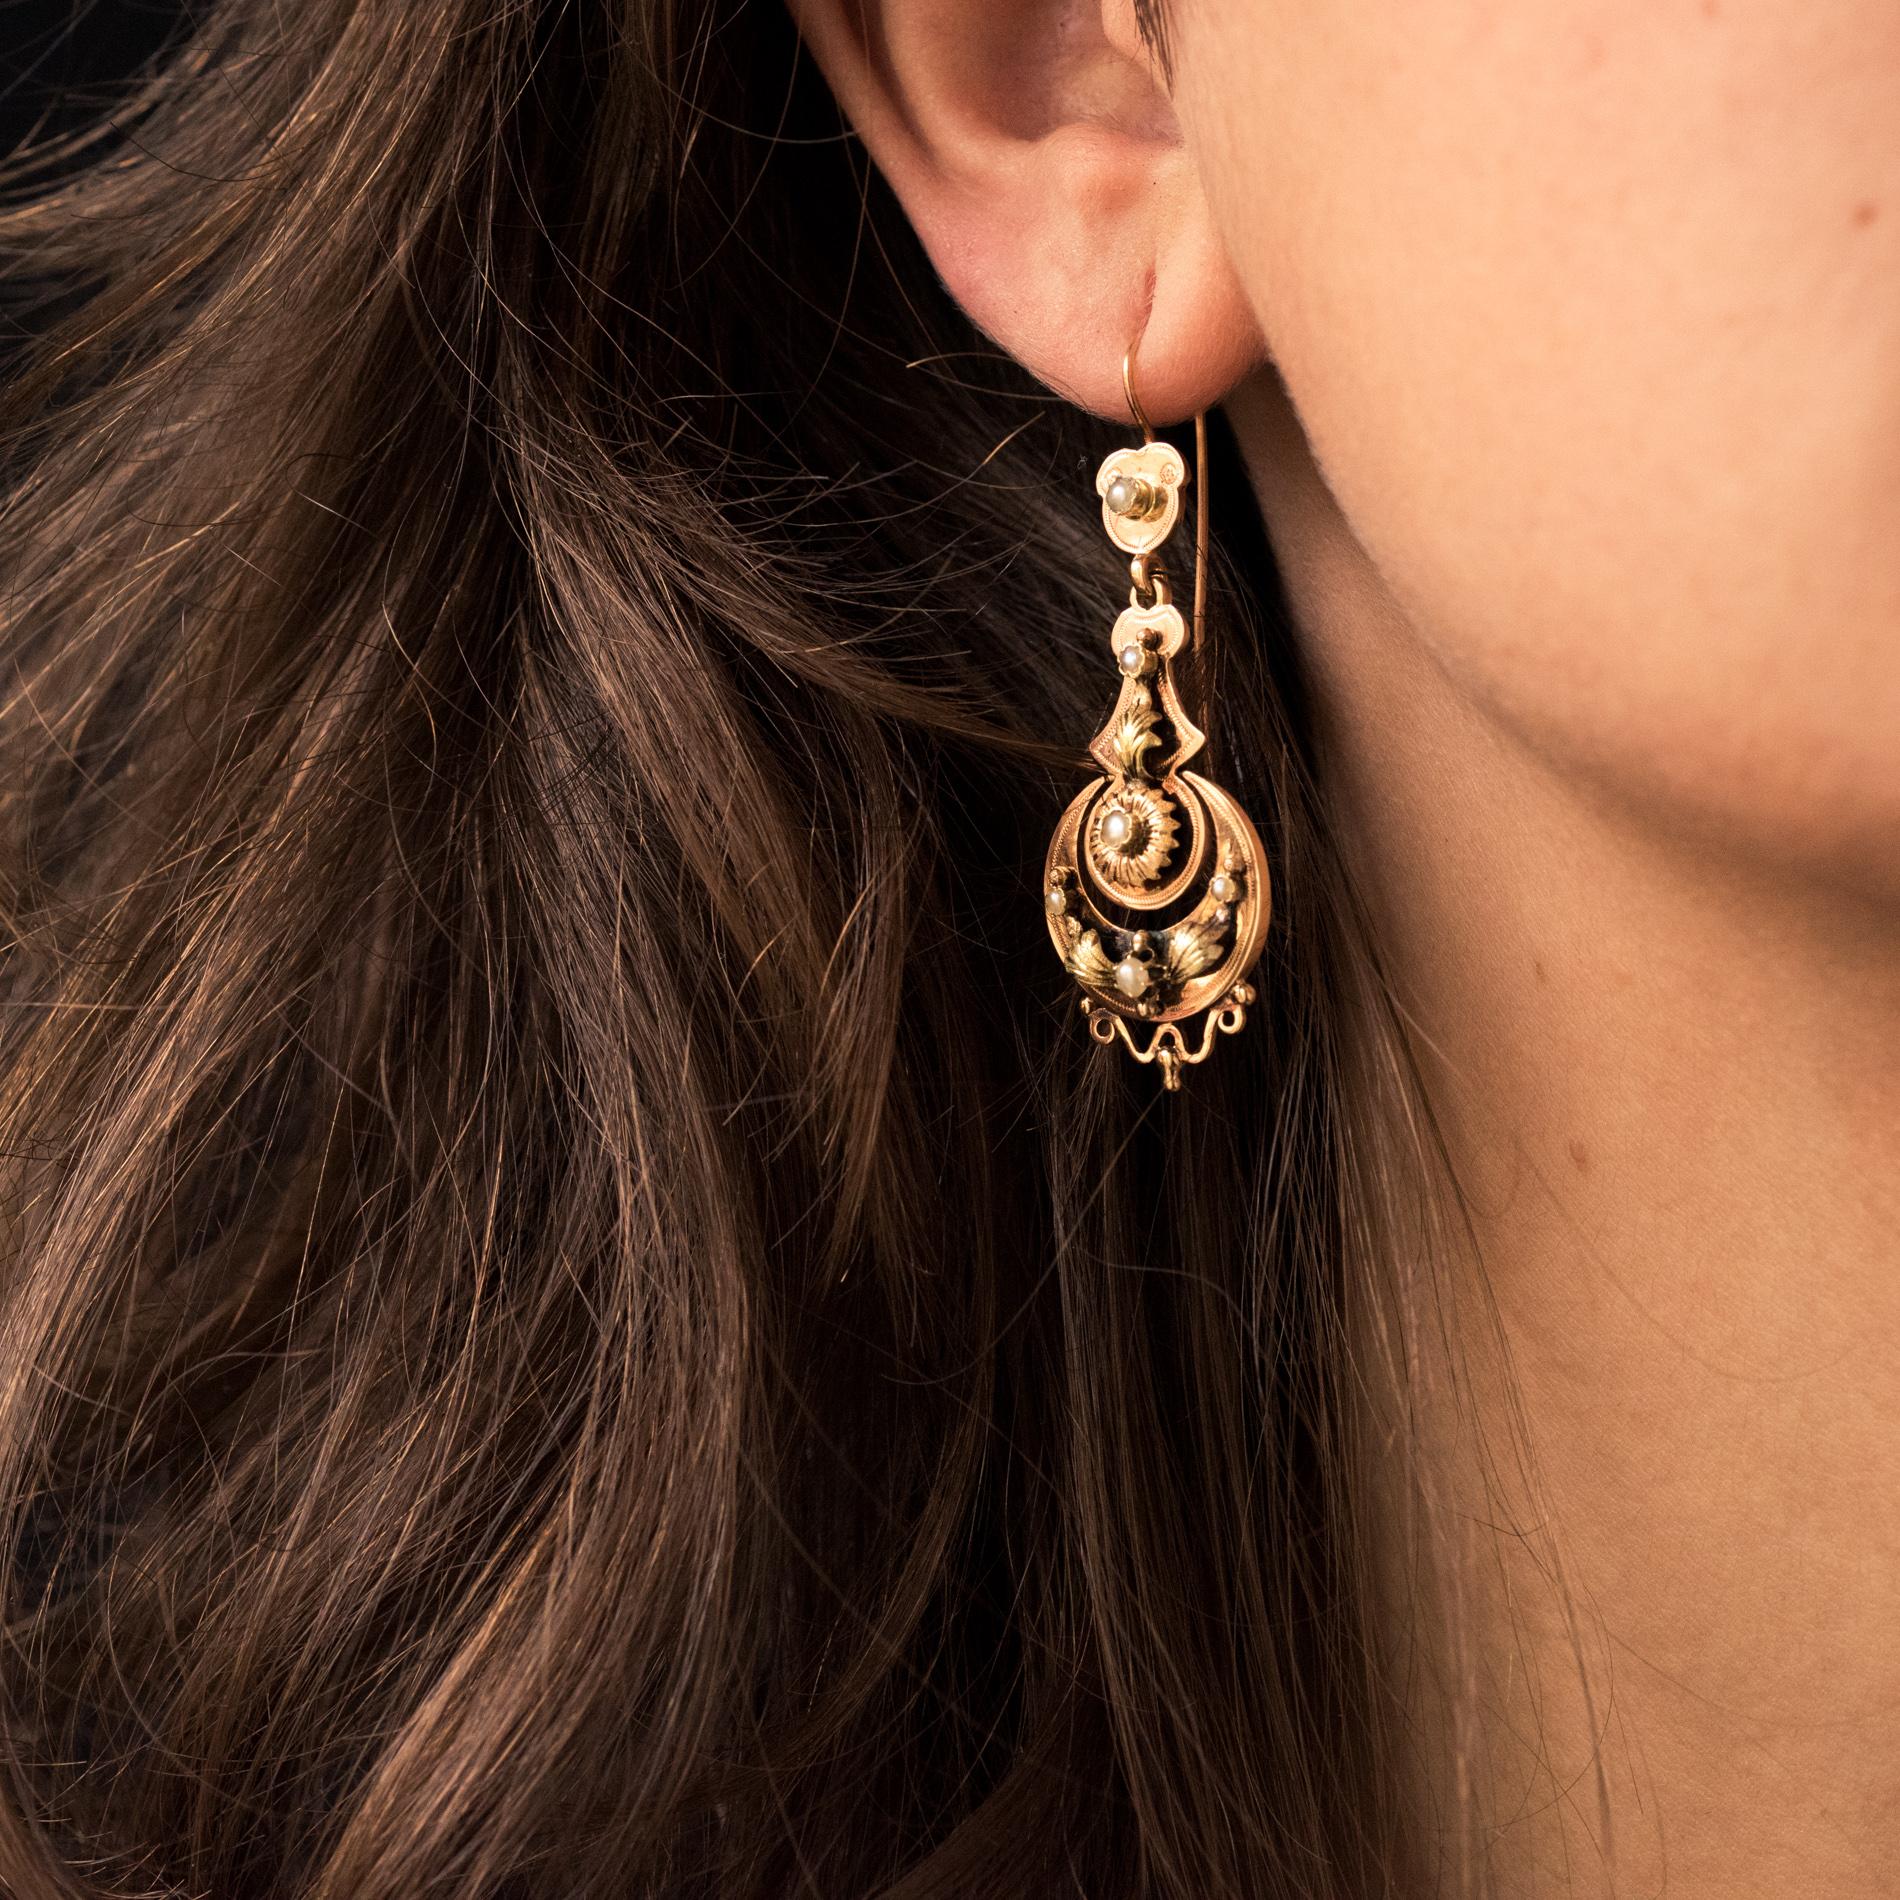 For pierced ears.
Pair of earrings in 18 karat rose and yellow gold, eagle's head hallmark.
Each pendant has a floral and plant motif enhanced with natural pearls, with a moving part in the center, all retained by a small shield set with a natural